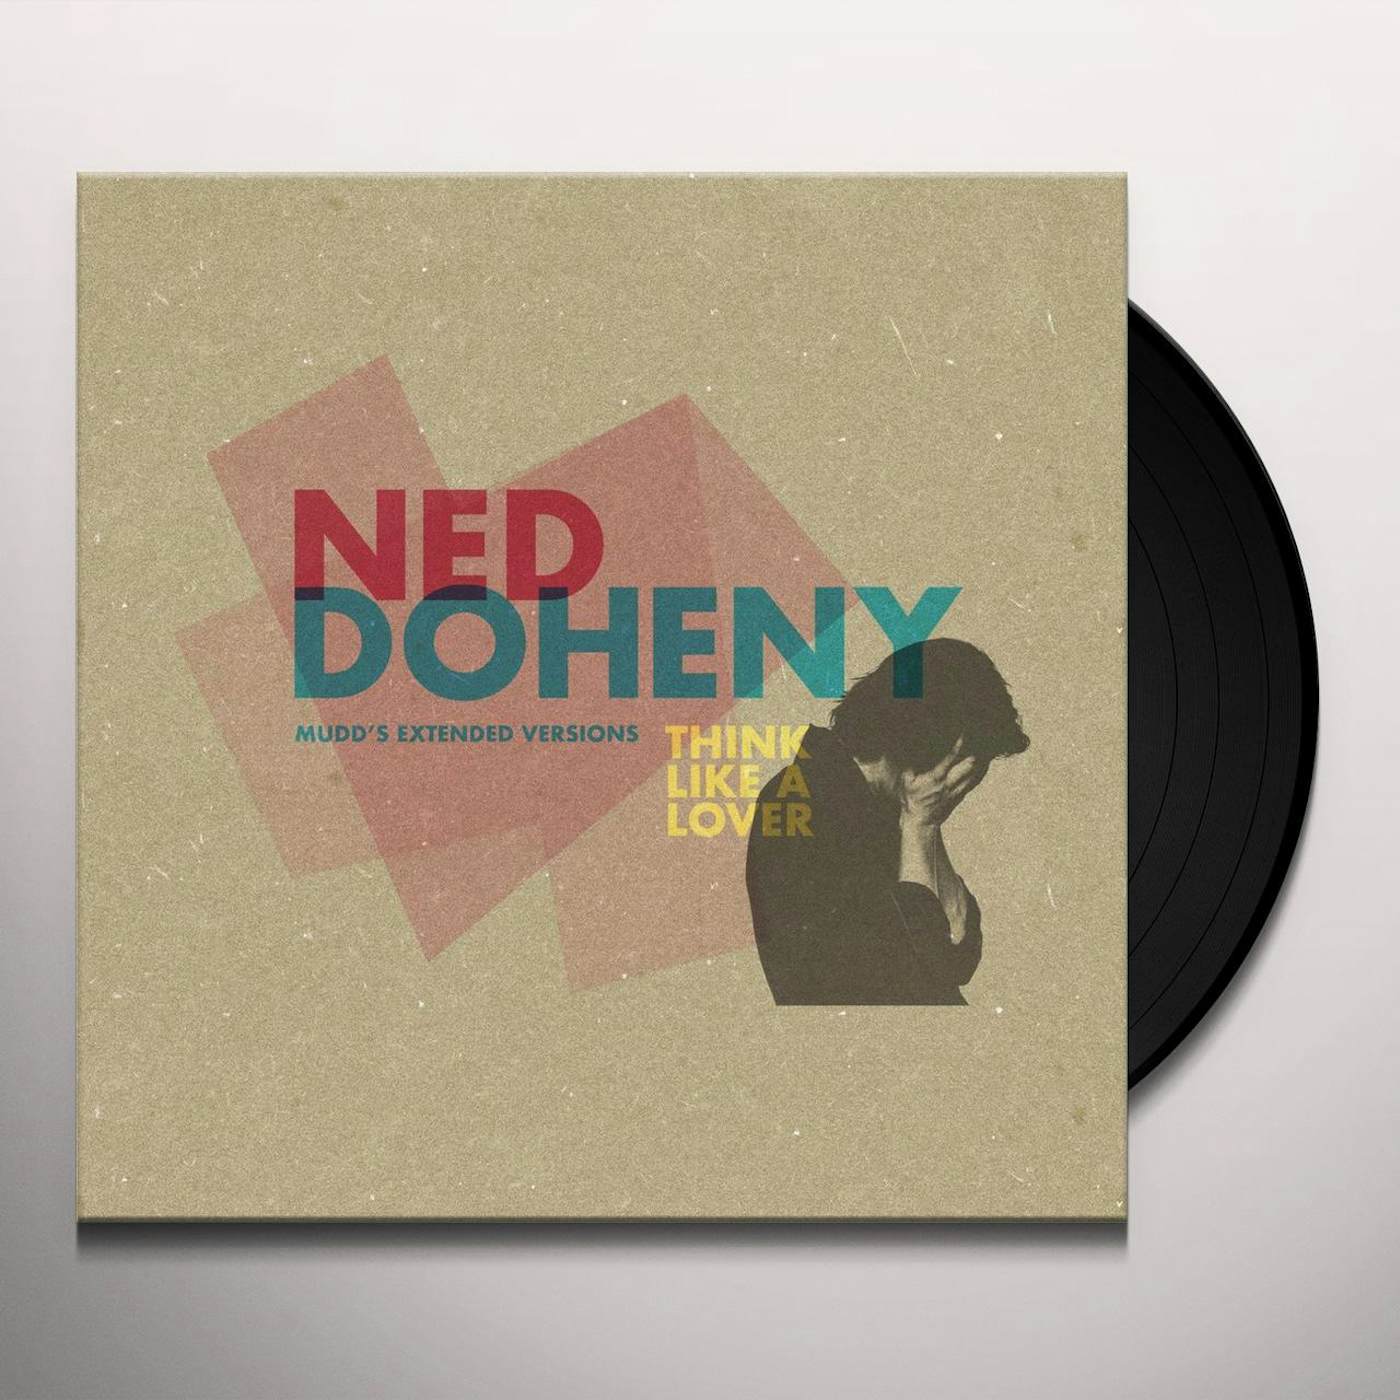 Ned Doheny THINK LIKE A LOVER (MUDD'S EXTENDED VERSIONS) Vinyl Record